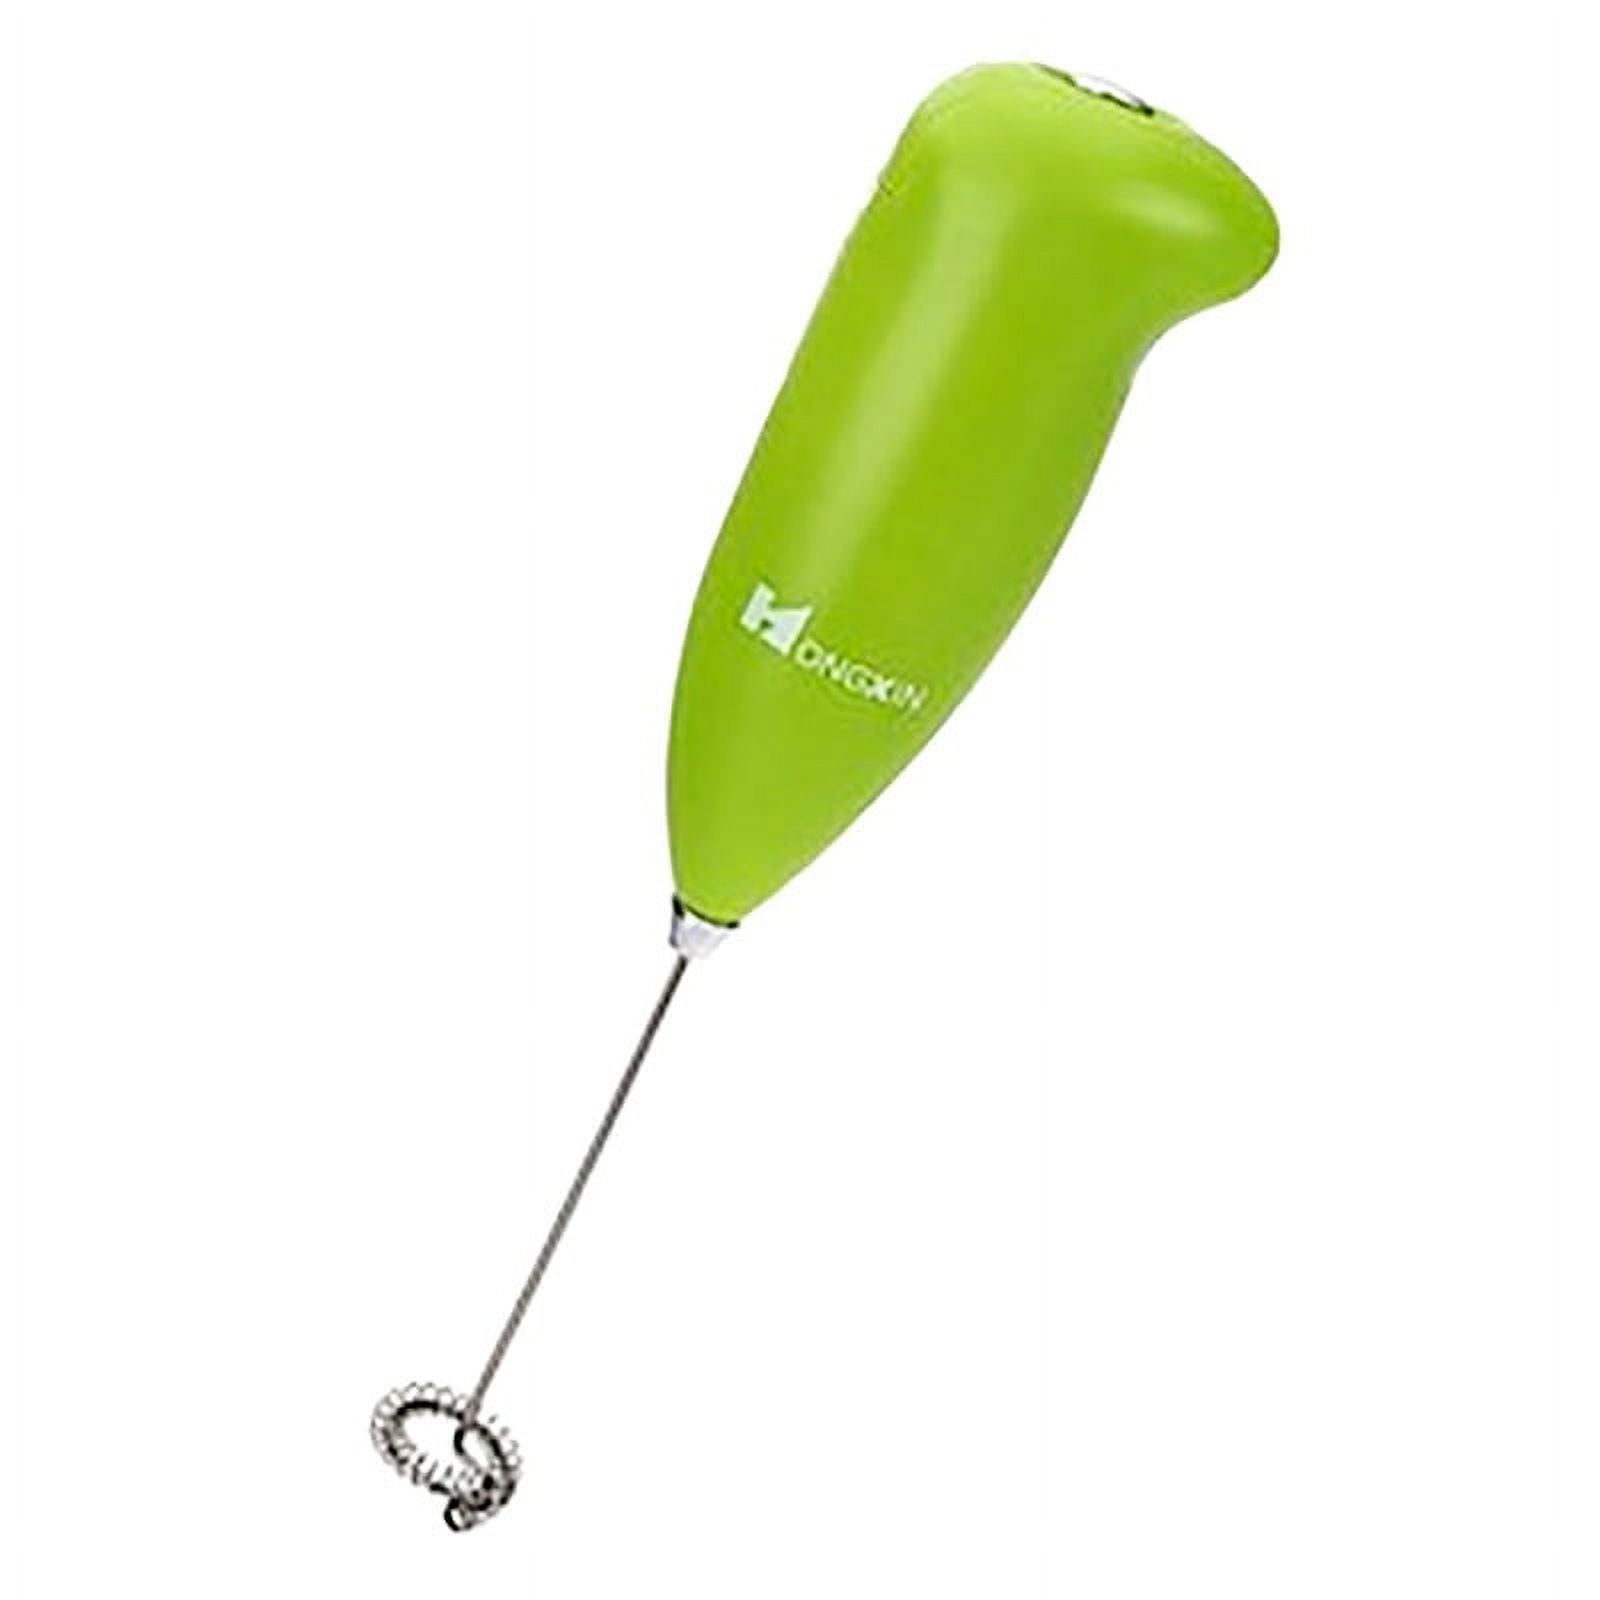 MAHZA Whisks for Cooking 3 Speed Adjustable Electric Auto Whisk Stirrer Stir Crazy Stick Blender Utensil Triangle Egg Beaters Food Sauce Soup Mixer